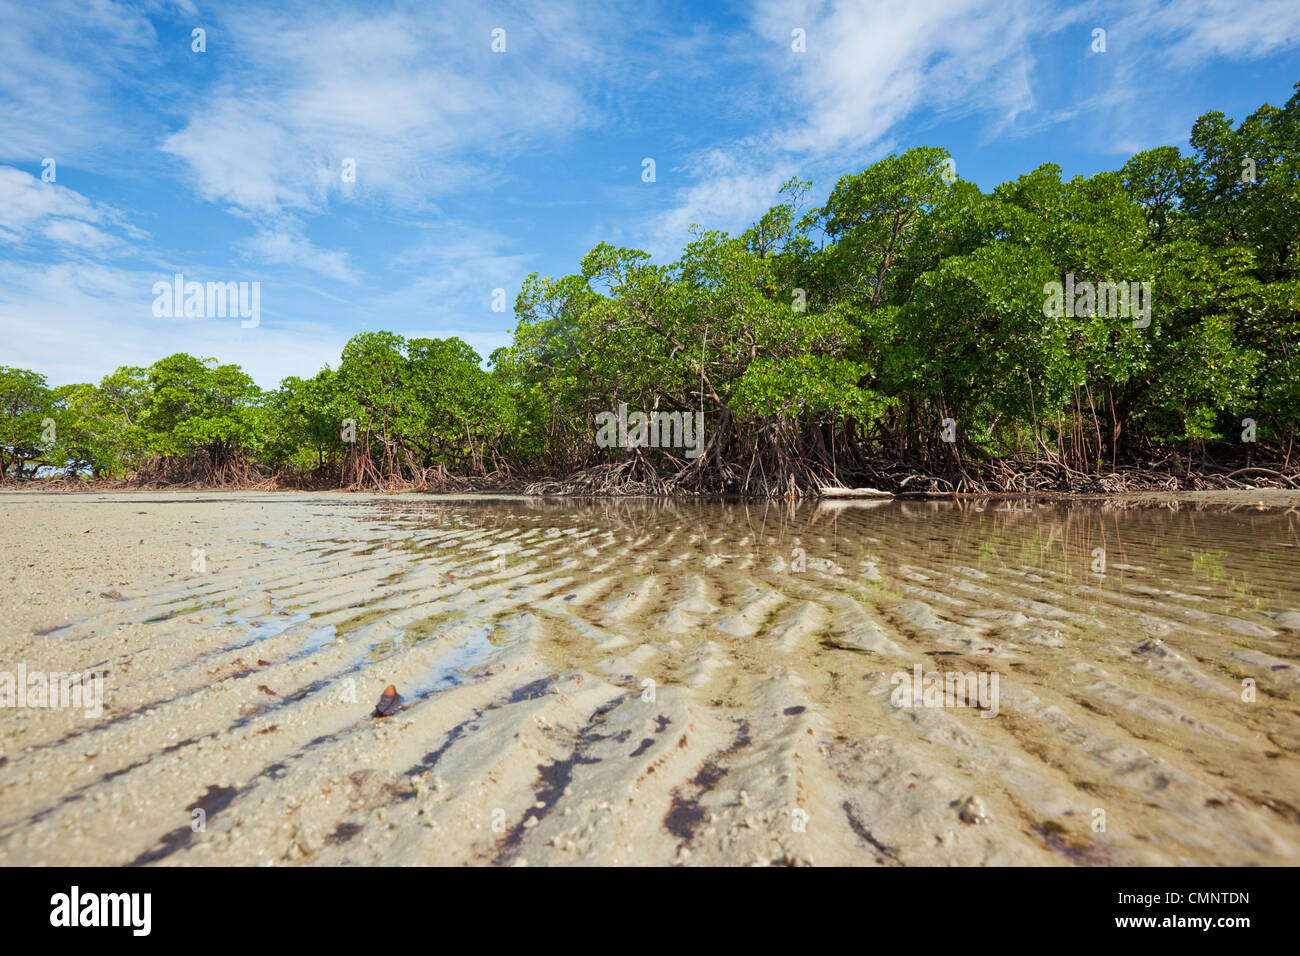 Mangrove forest at low tide on Myall Beach. Cape Tribulation, Daintree National Park, Queensland, Australia Stock Photo